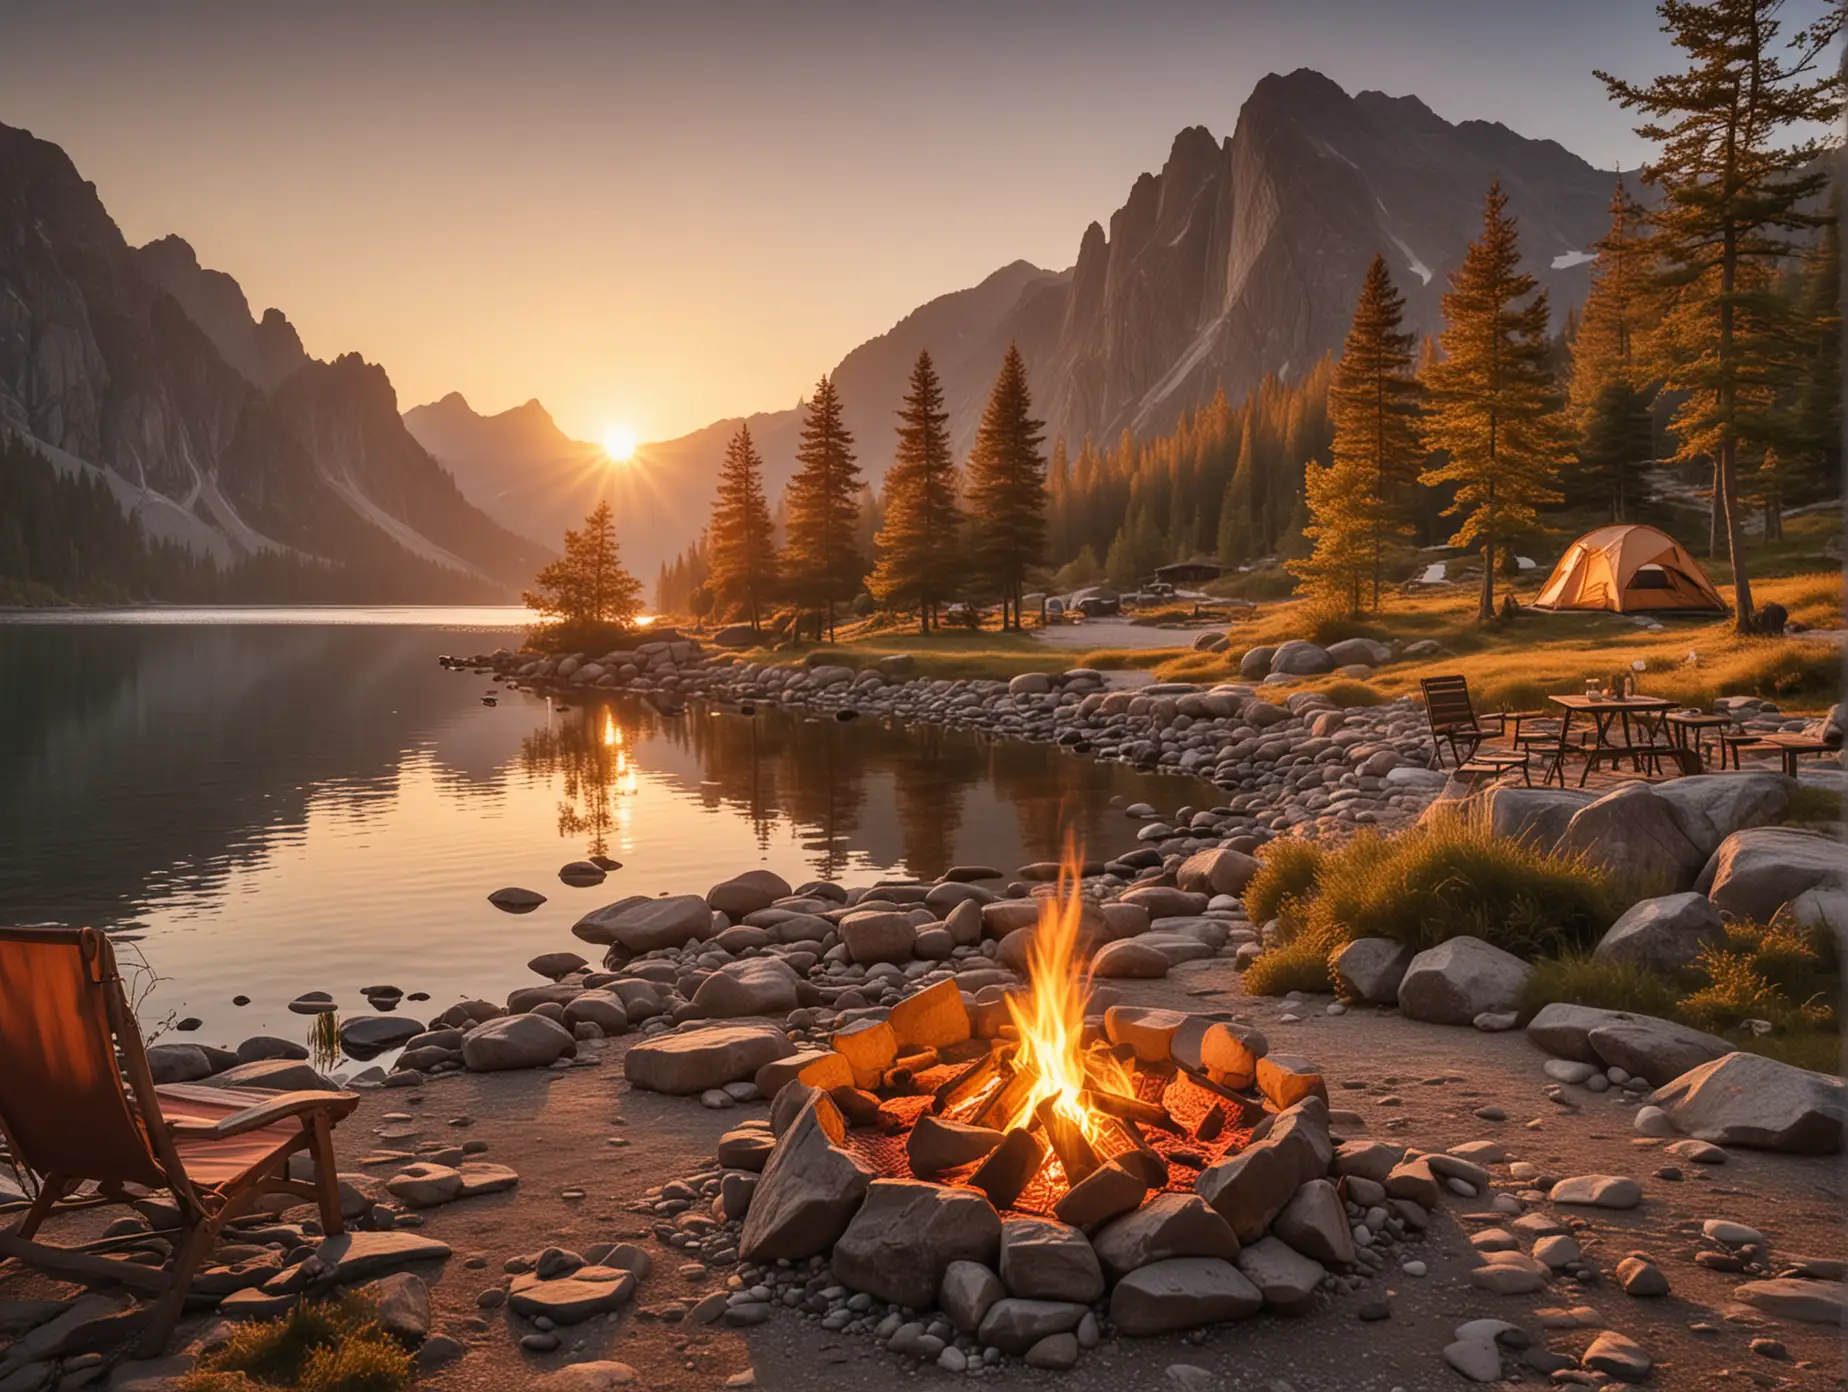 A serene lakeside campsite at sunset with a blazing campfire surrounded by rocks in the background. A grill on a wooden picnic table is cooking meat. A pitched tent and a chair are positioned near the water, and the sun is setting behind the mountains, casting a warm, orange glow over the scene.